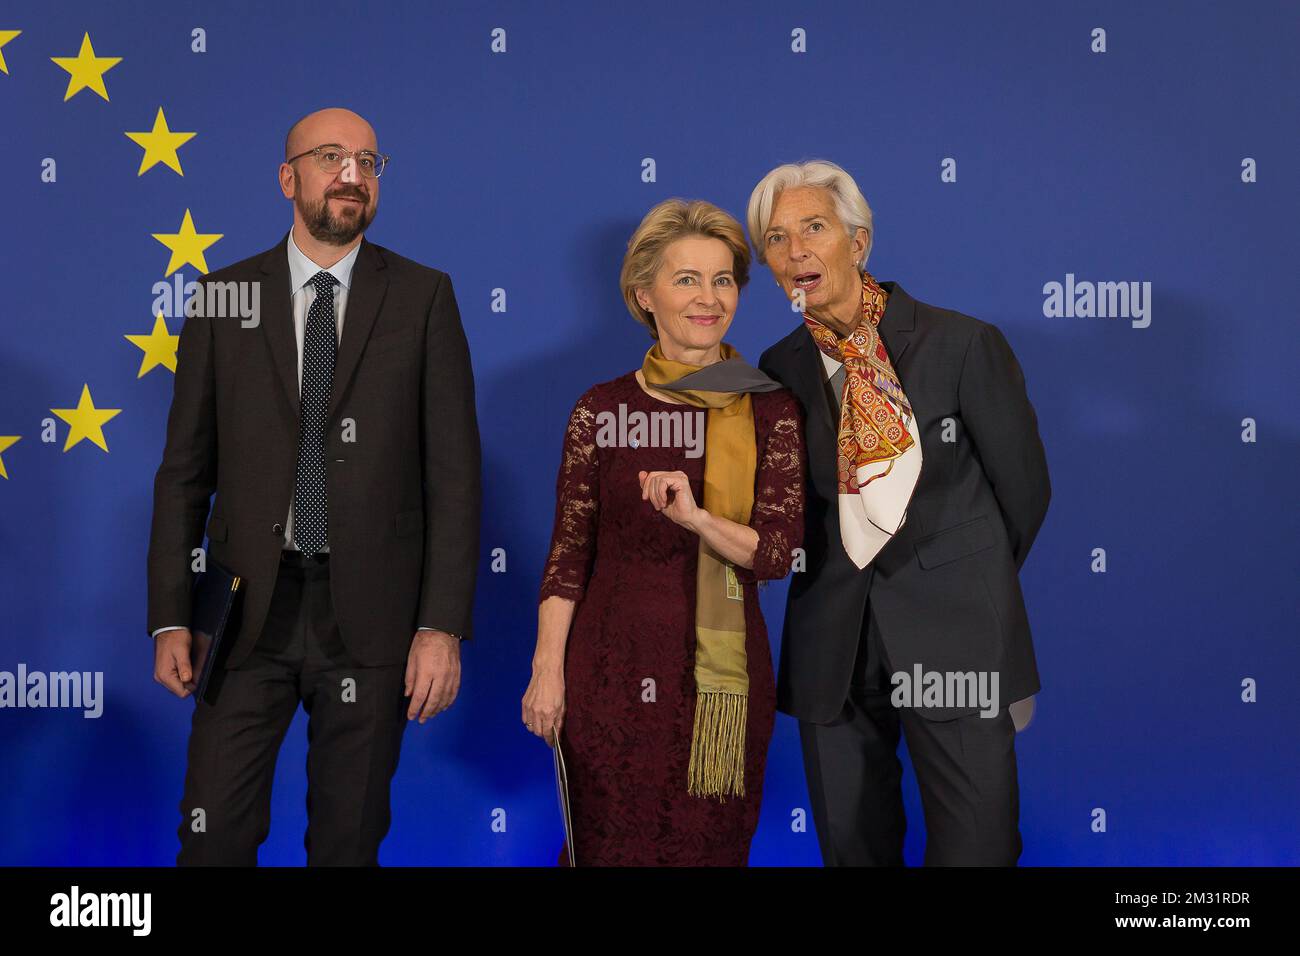 European Council President Charles Michel, New European Commission President Ursula Von der Leyen and European Central Bank President Christine Lagarde pictured during a celebration on the occasion of the 10th anniversary of the Lisbon Treaty at the European headquarters in Brussels, Sunday 01 December 2019. BELGA PHOTO JAMES ARTHUR GEKIERE Stock Photo